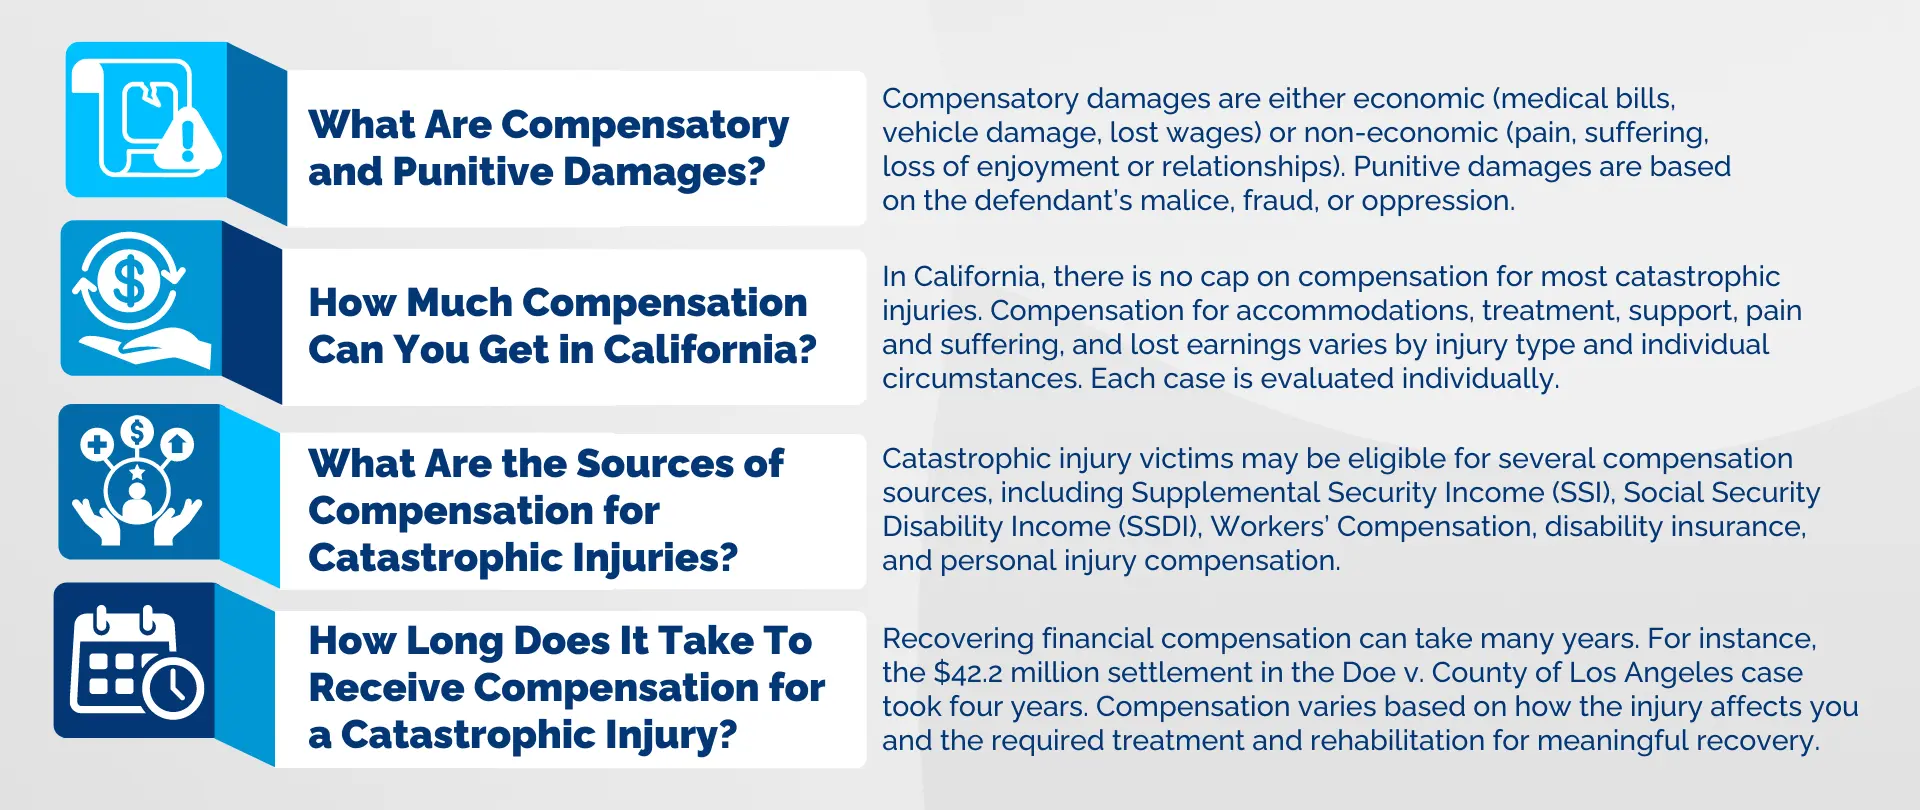 An infographic that addresses the frequently asked questions about Compensation for Catastrophic Injuries. These include ‘What are compensatory and punitive damages?,’ ‘How much compensation can you get in California?,’ ‘What are the sources of compensation for catastrophic injuries?,’ ‘How long does it take to receive compensation for a catastrophic injury?’